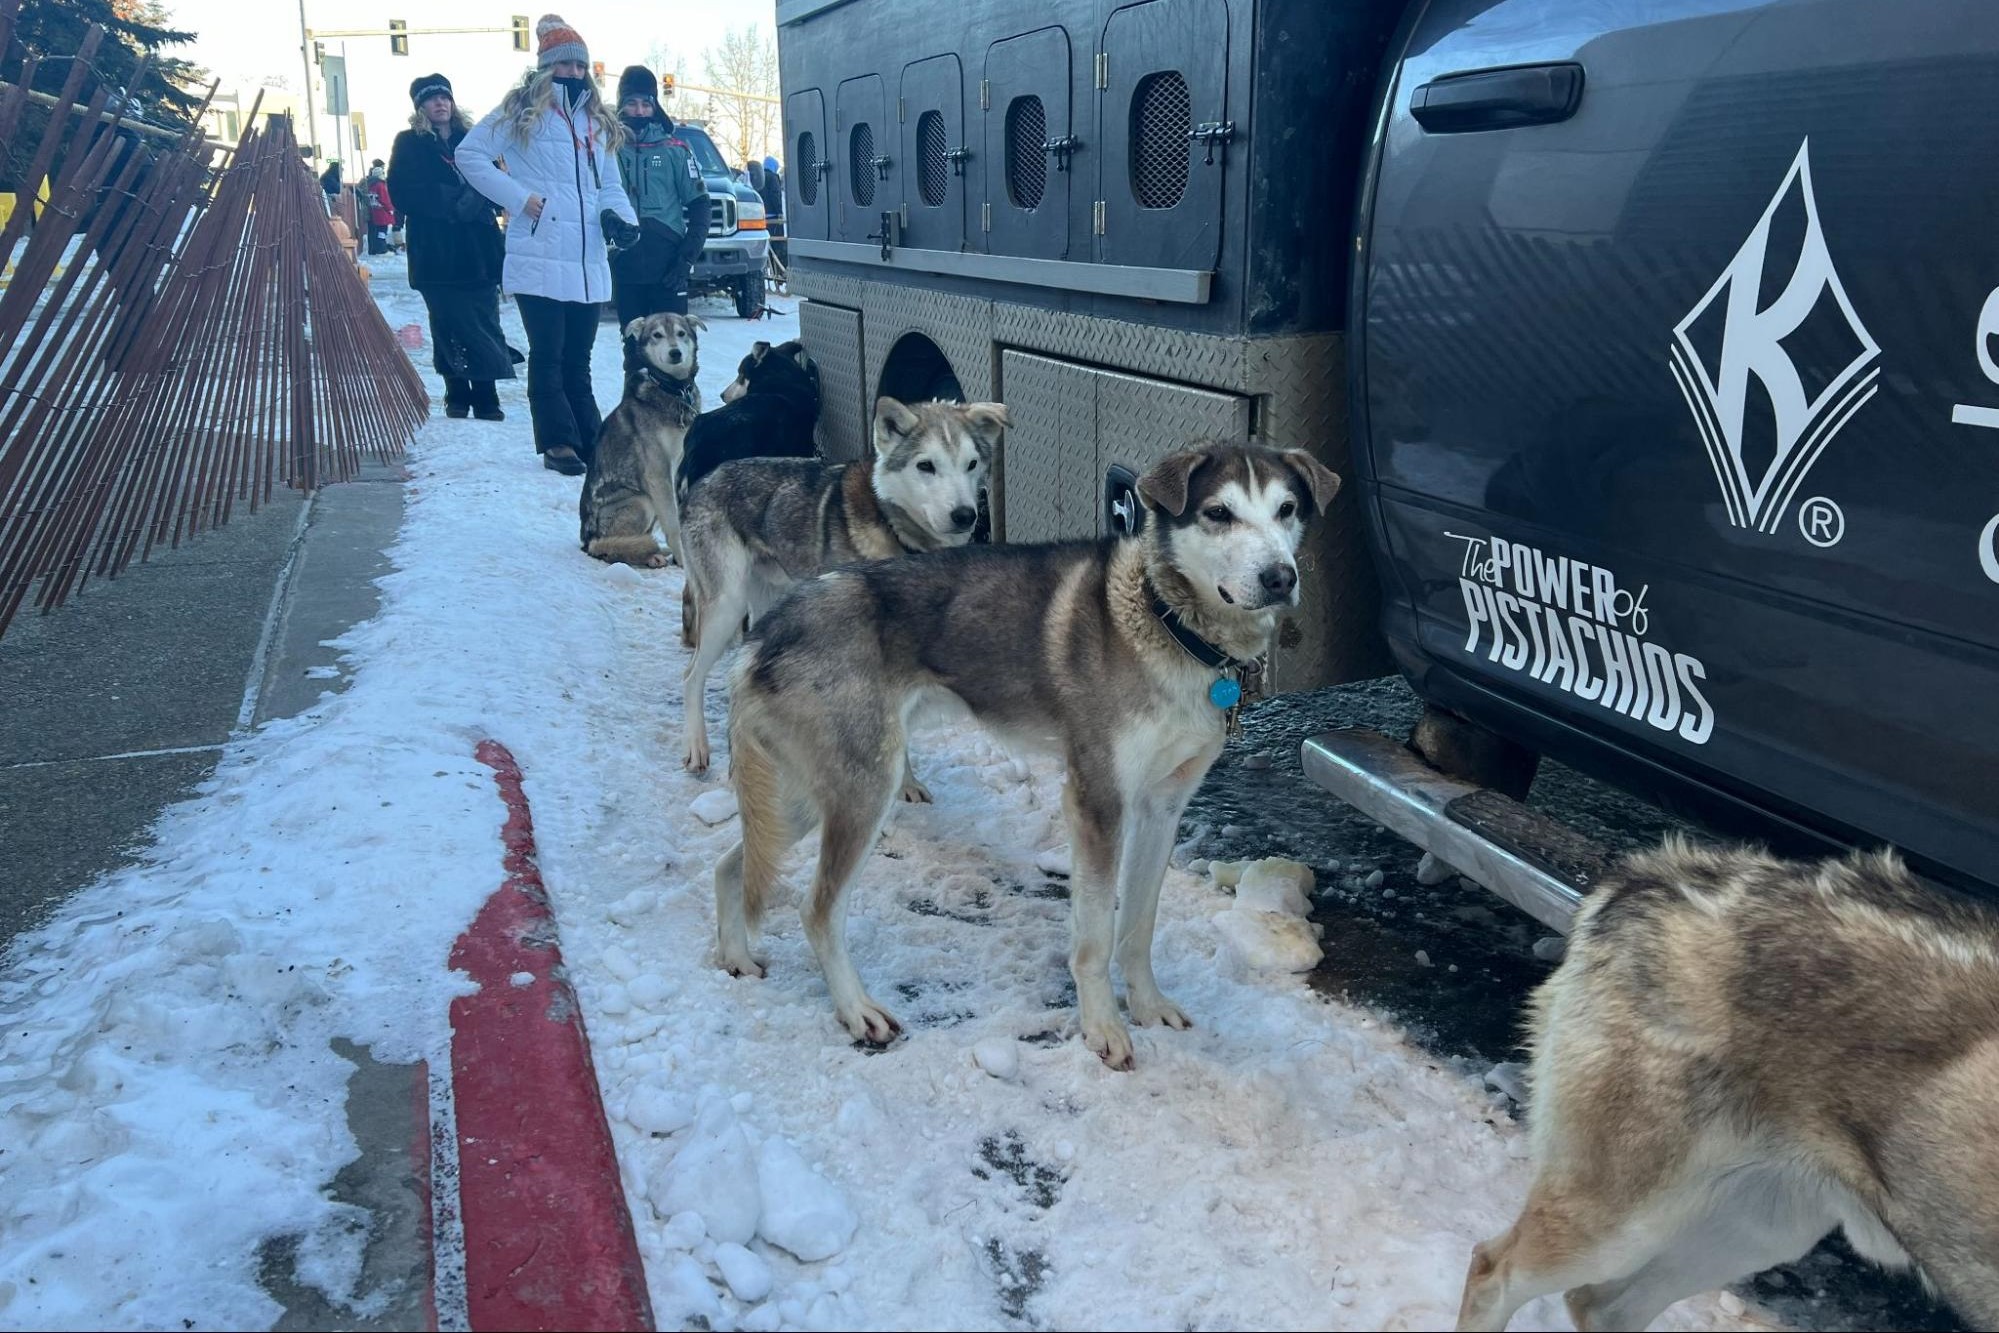 huskies next to a dog truck in a snowy street